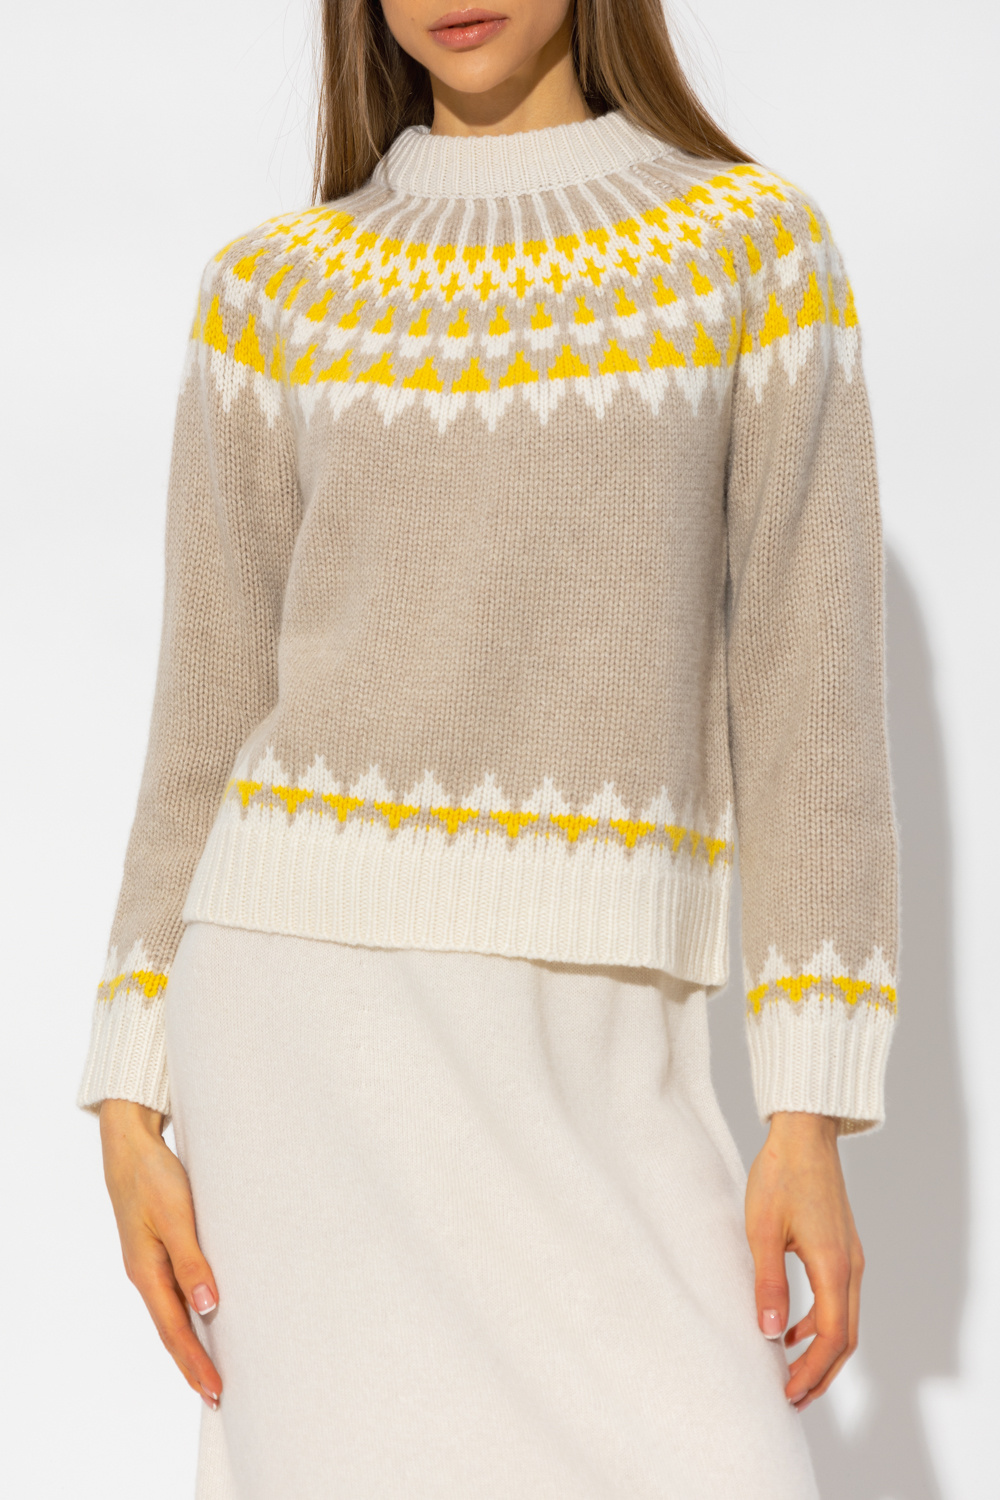 Lisa Yang ‘Nelly’ sweater